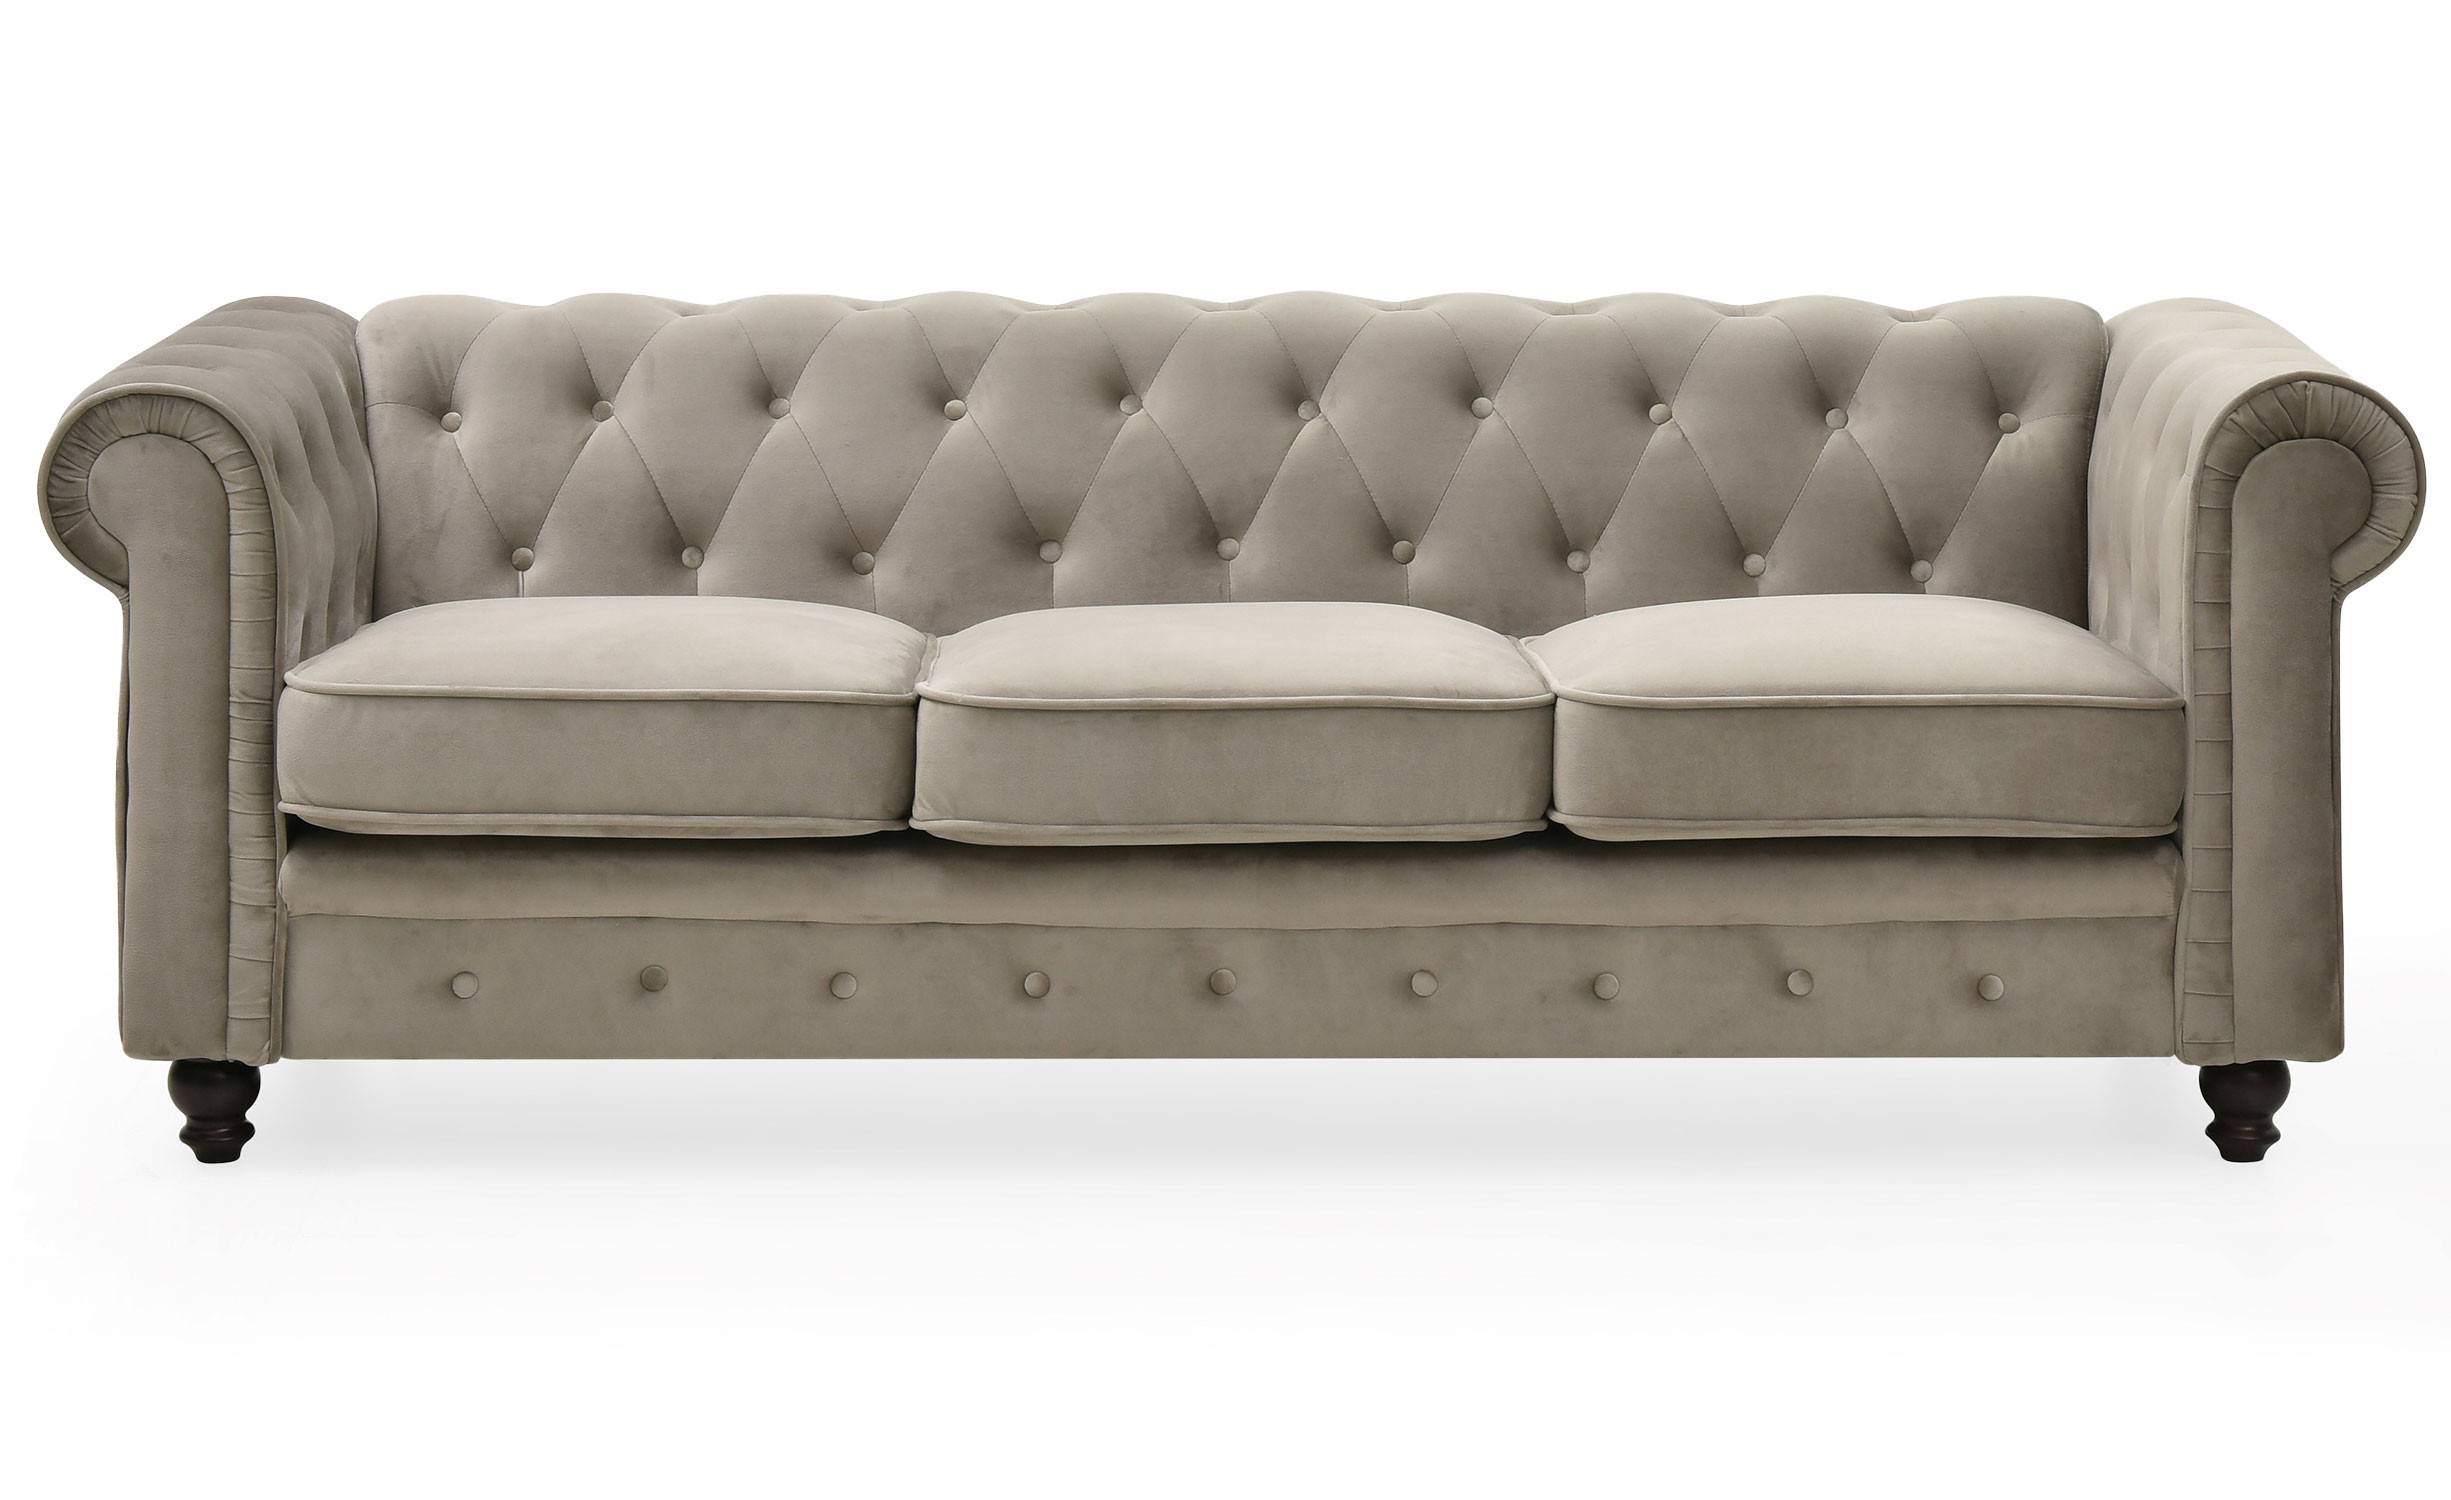 Grand canapé 3 places Chesterfield Velours Taupe